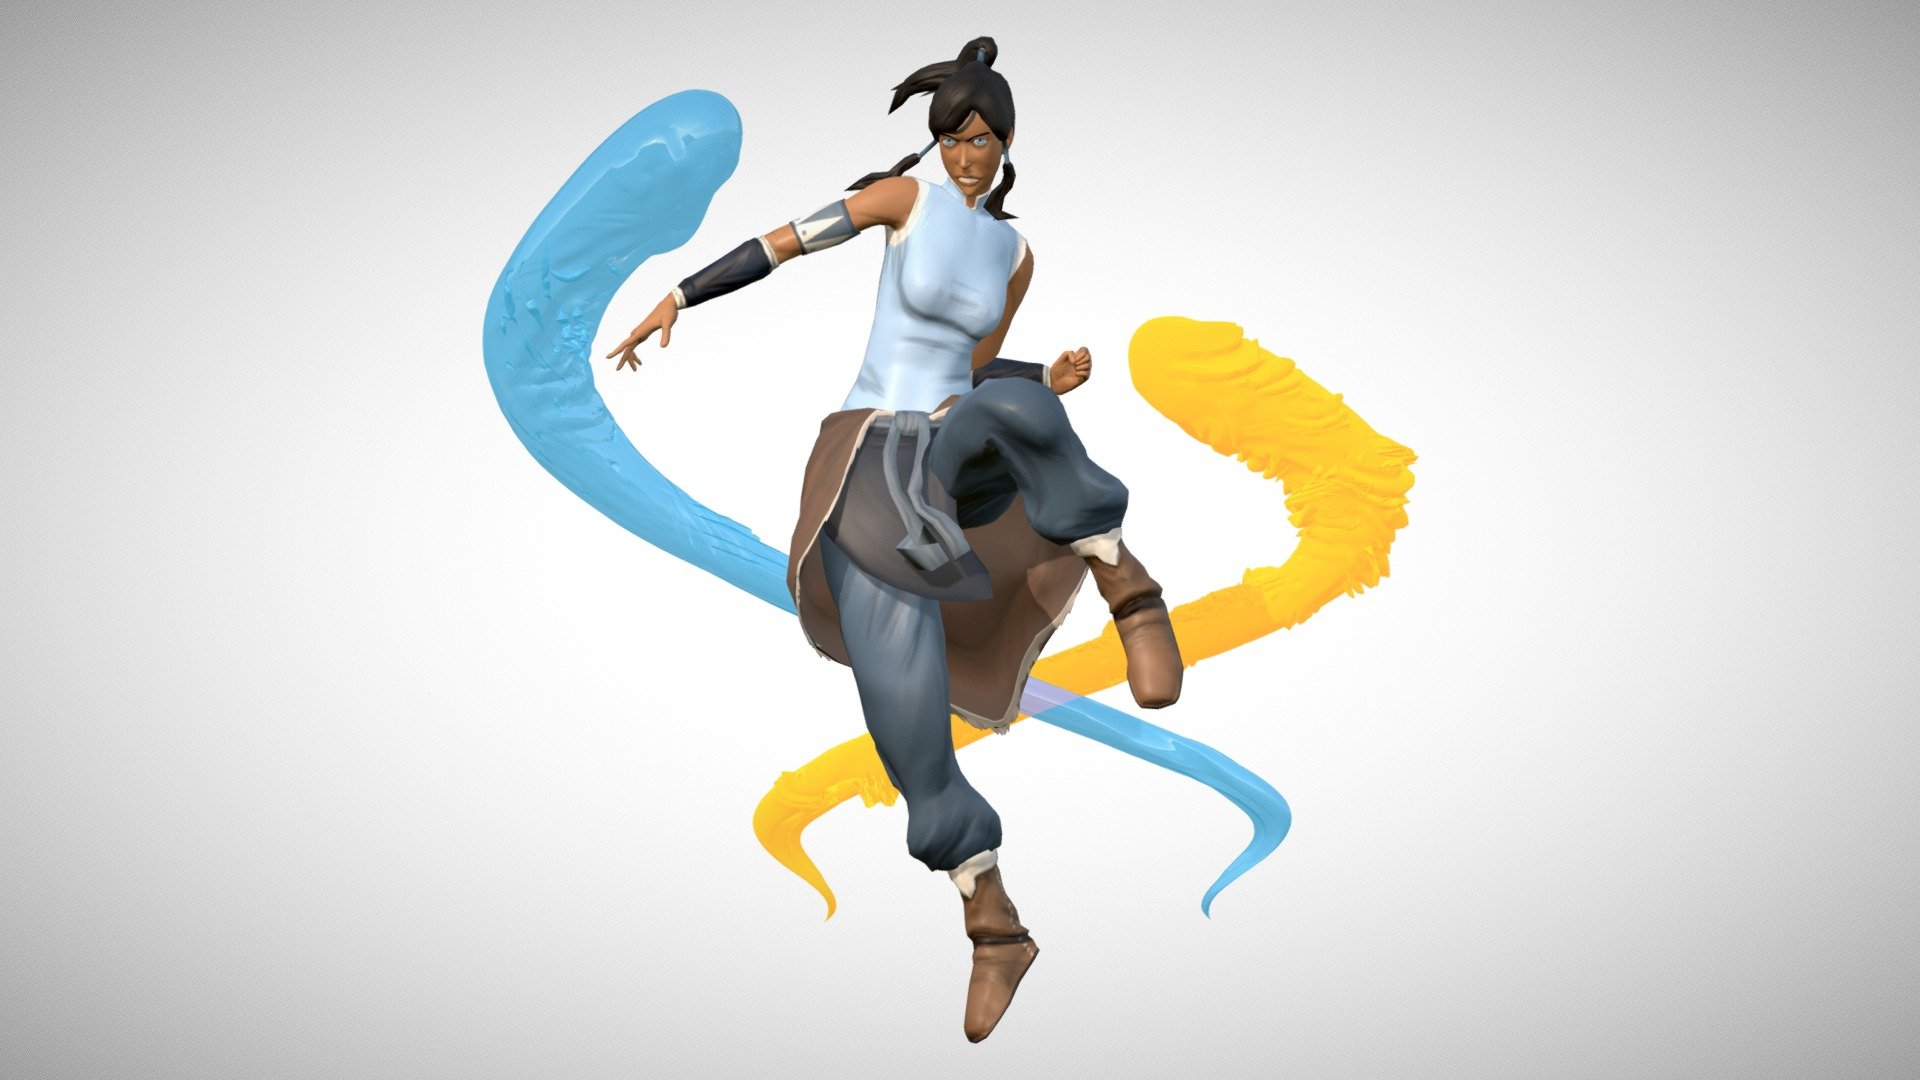 Patreon Project 2: Korra - Avatar

(Free for Tier 2 Patrons)

Timelapse: https://youtu.be/A5gyZhu69eg

For discounts on commissions: patreon.com/PedroCorreiaArtwork

Pricing: pedrocorreiaartwork.com/pricing/

Portfolio: pedrocorreiaartwork.com - Korra - Avatar - Buy Royalty Free 3D model by PedroCorreiaArtwork 3d model